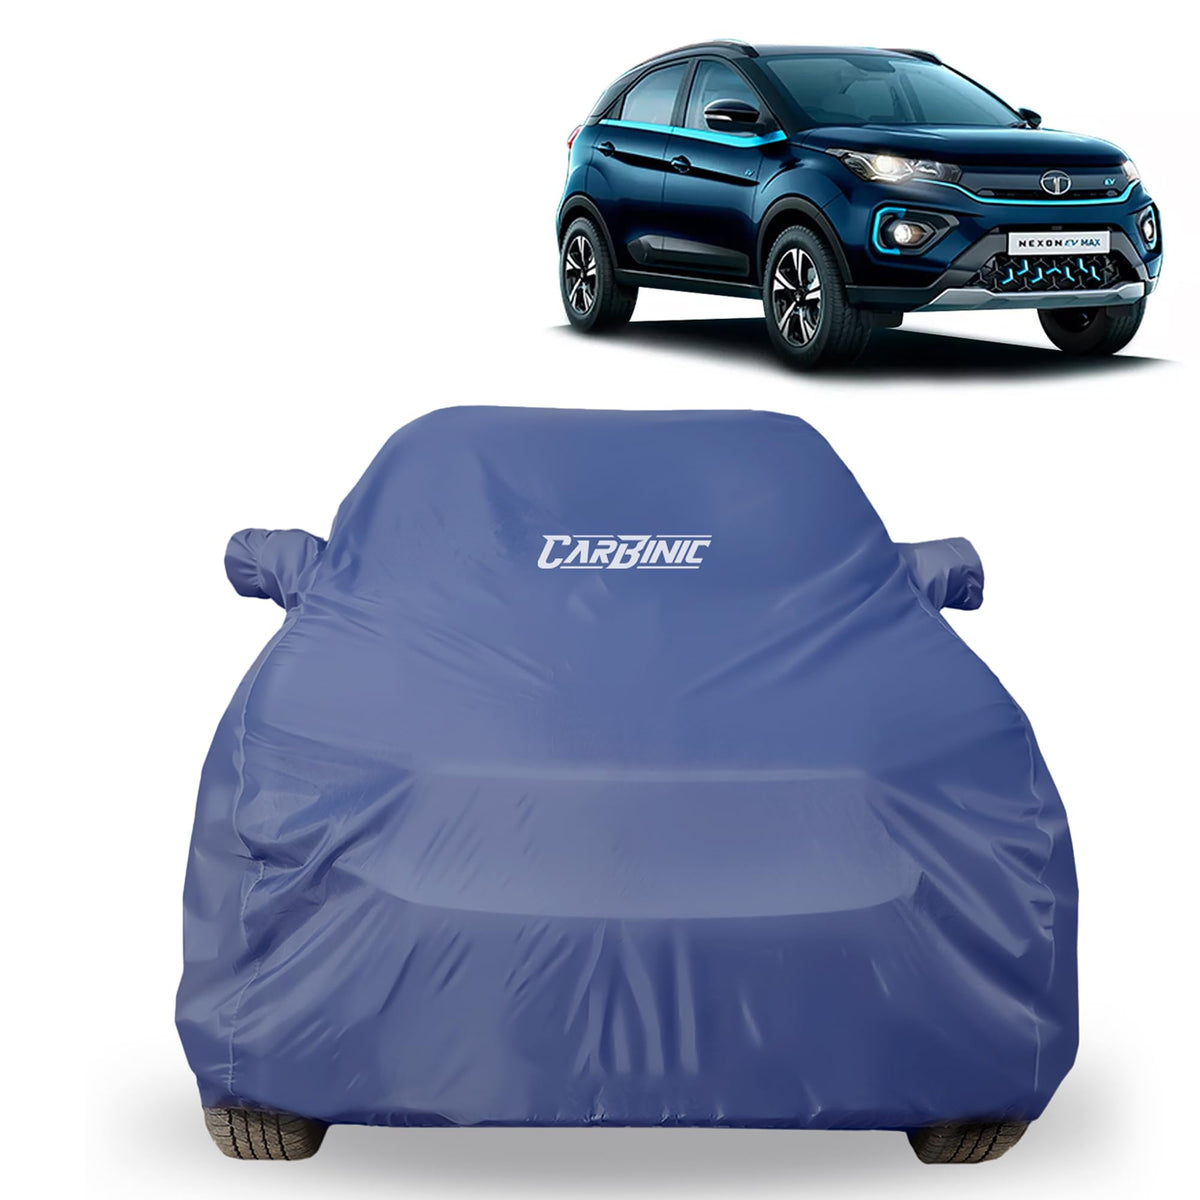 CARBINIC Car Body Cover for Mahindra XUV500 2016 | Water Resistant, UV Protection Car Cover | Scratchproof Body Shield | All-Weather Cover | Mirror Pocket & Antenna | Car Accessories Dusk Blue